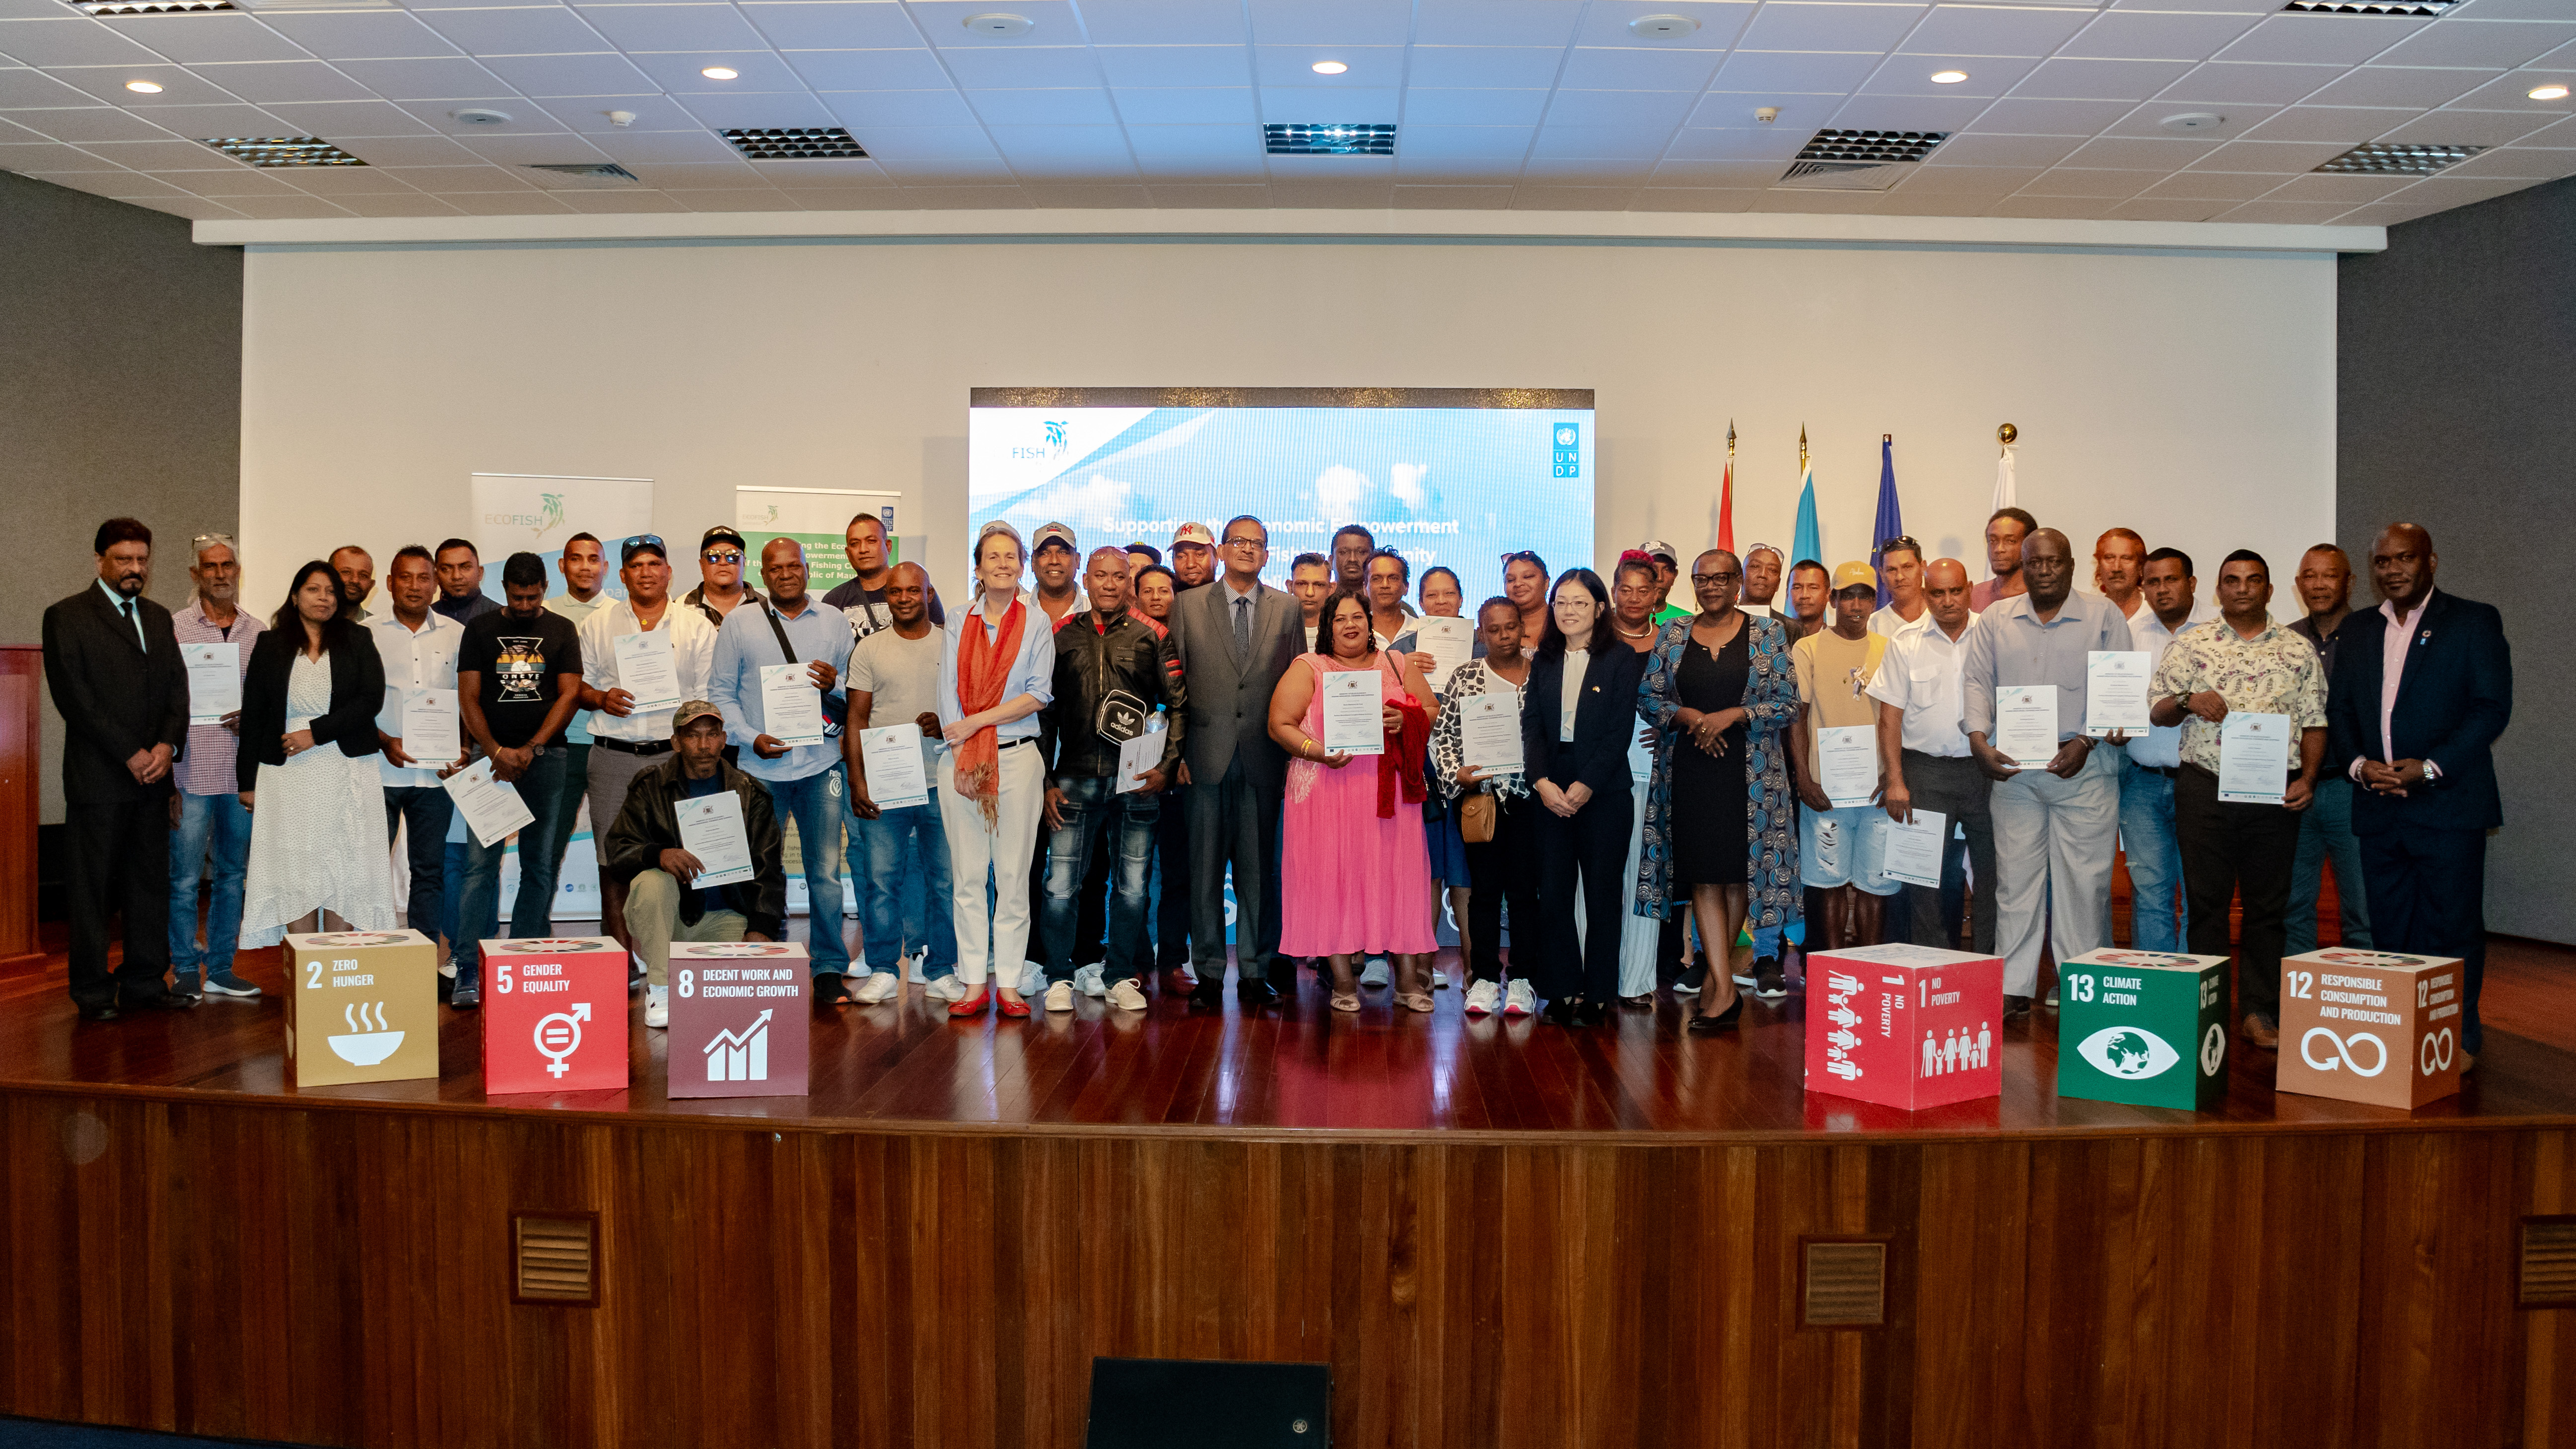 Launch of the RodMoFad mobile application and award ceremony for longline fishing training under the Mauritius E€OFISH project